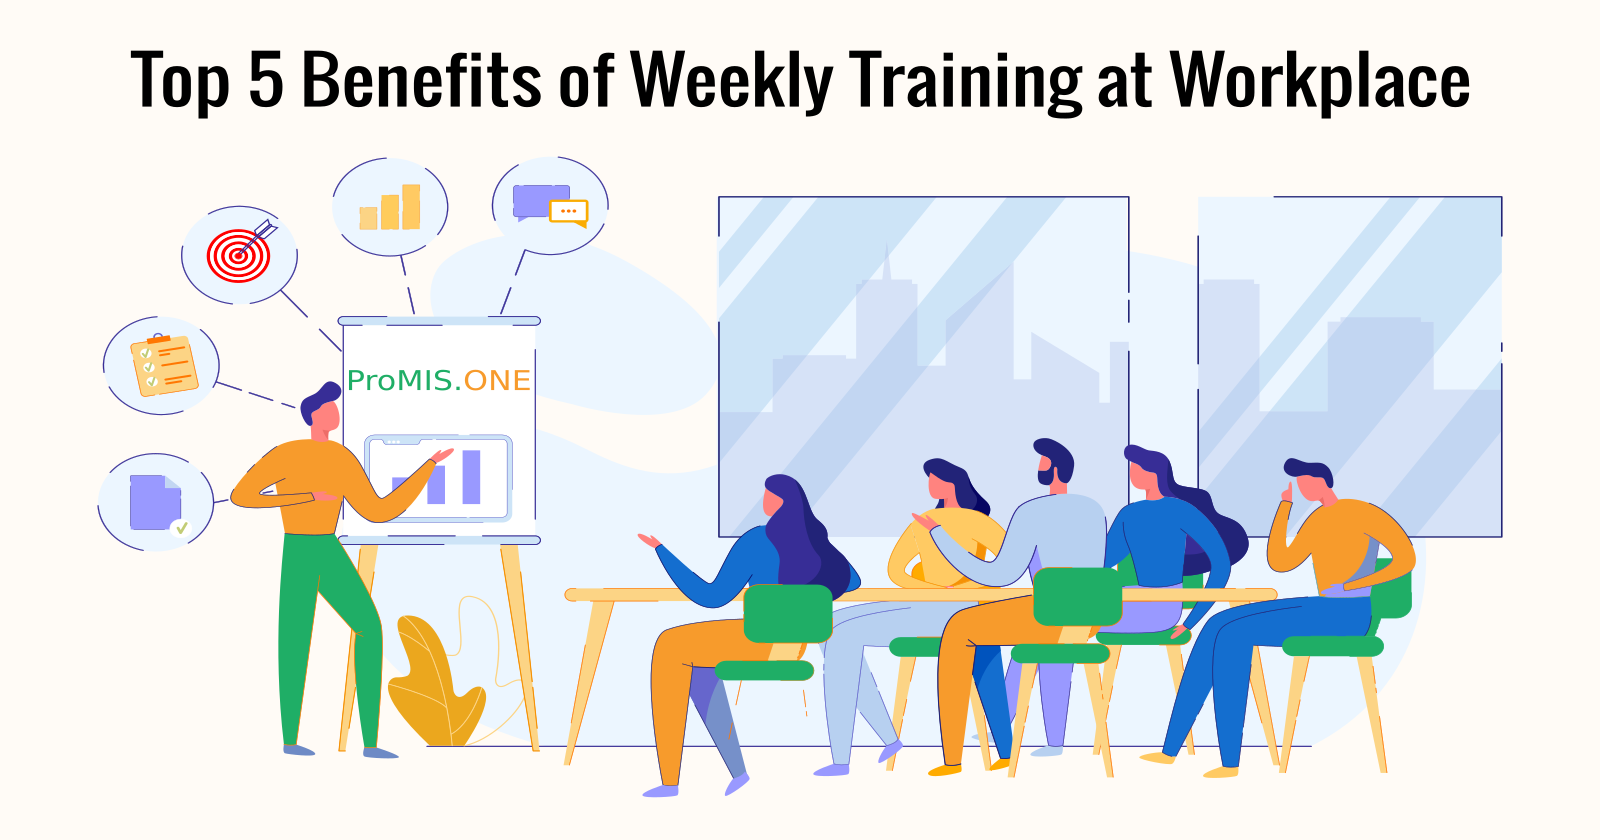 Top 5 Benefits of Weekly Training at Workplace